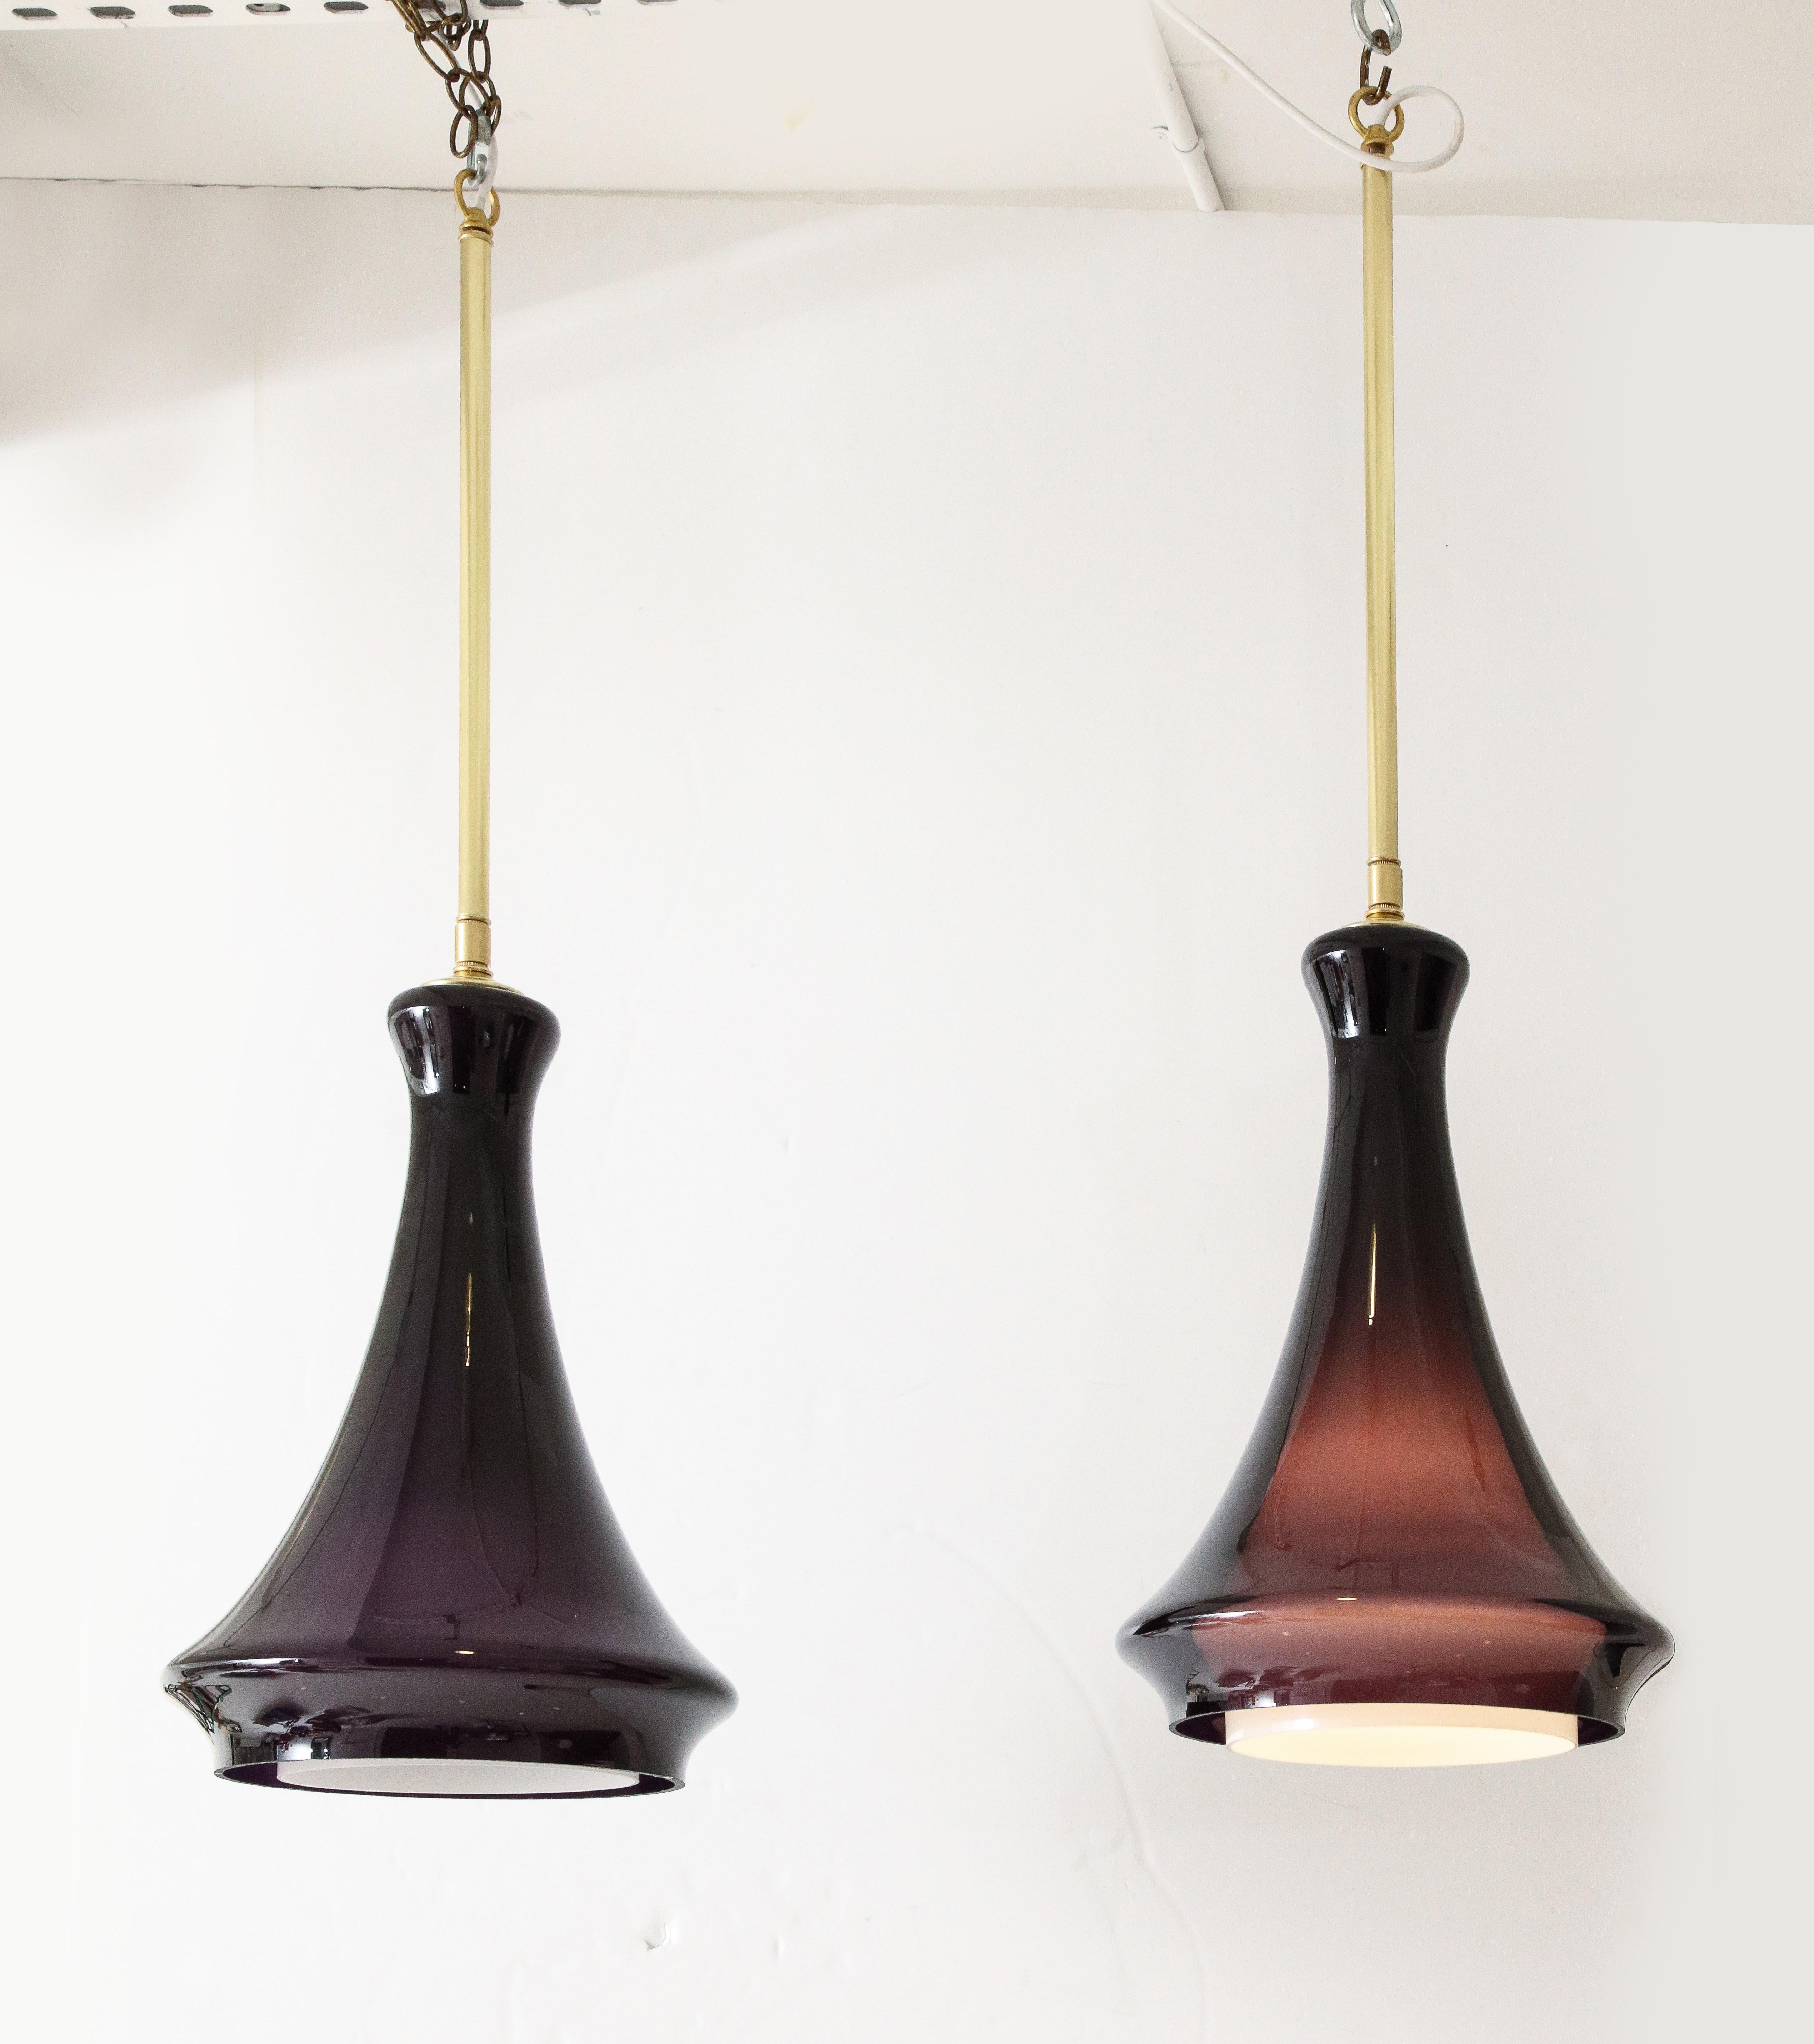 Stunning pair of large glass pendant lights.
Each pendant light  is in two parts  with the Dark Rich Aubergine glass securely sitting over the White milk glass inner shade which are illuminated by a Newly rewired single standard size light